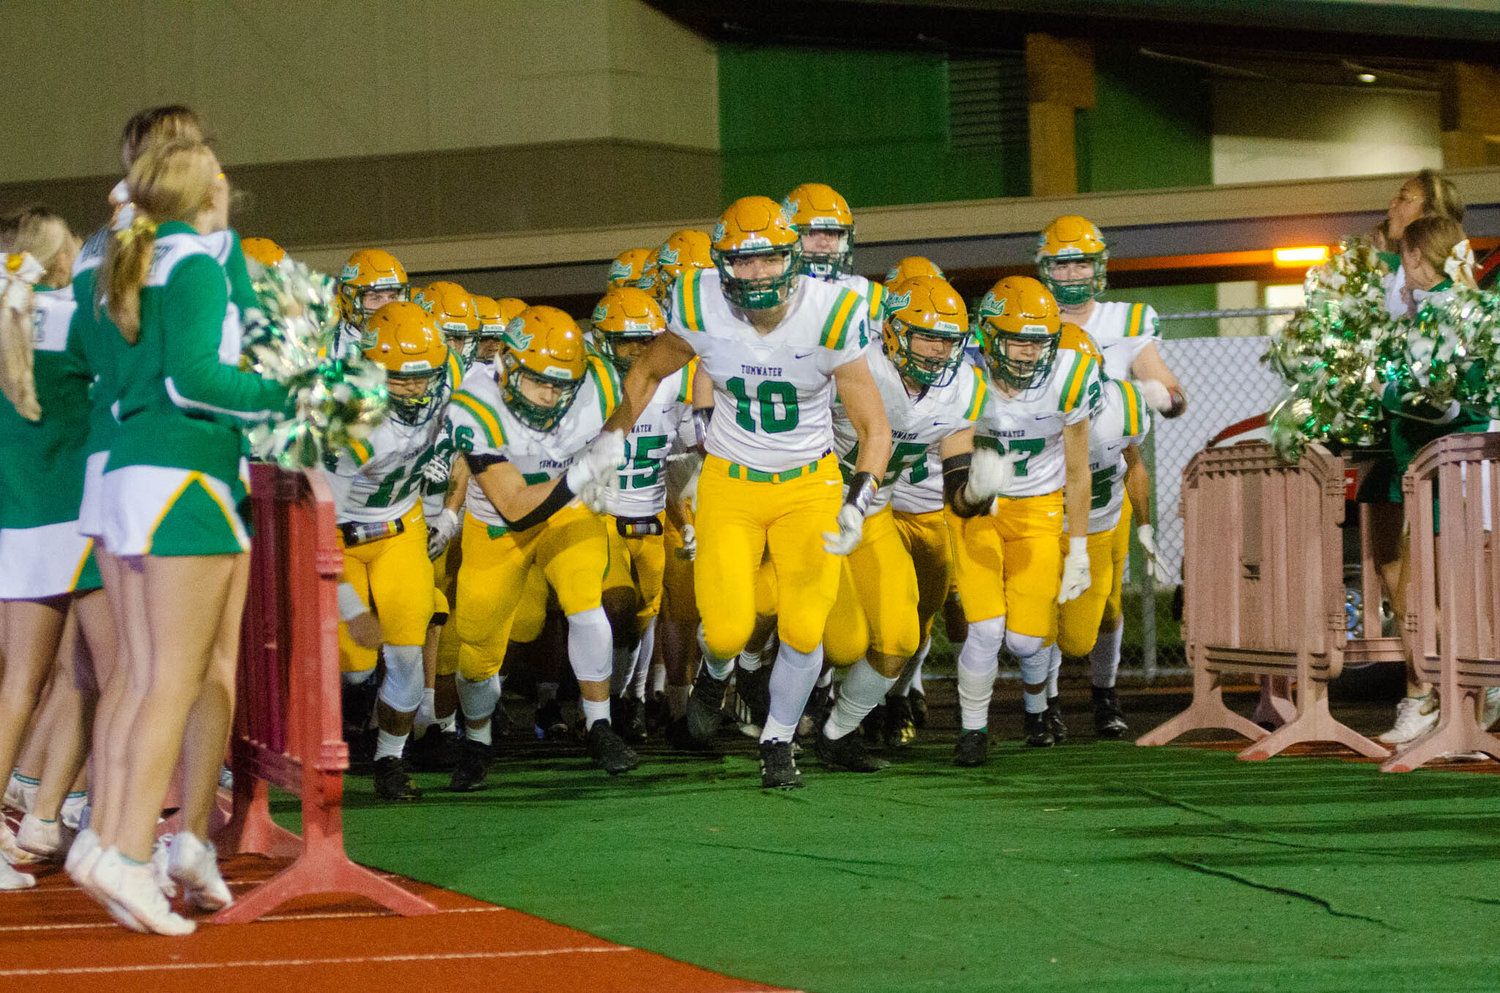 The T-Birds get ready to enter the gridiron at Friday night’s Pioneer Bowl against Black Hills. Tumwater won the game in a decisive 50-7 victory.